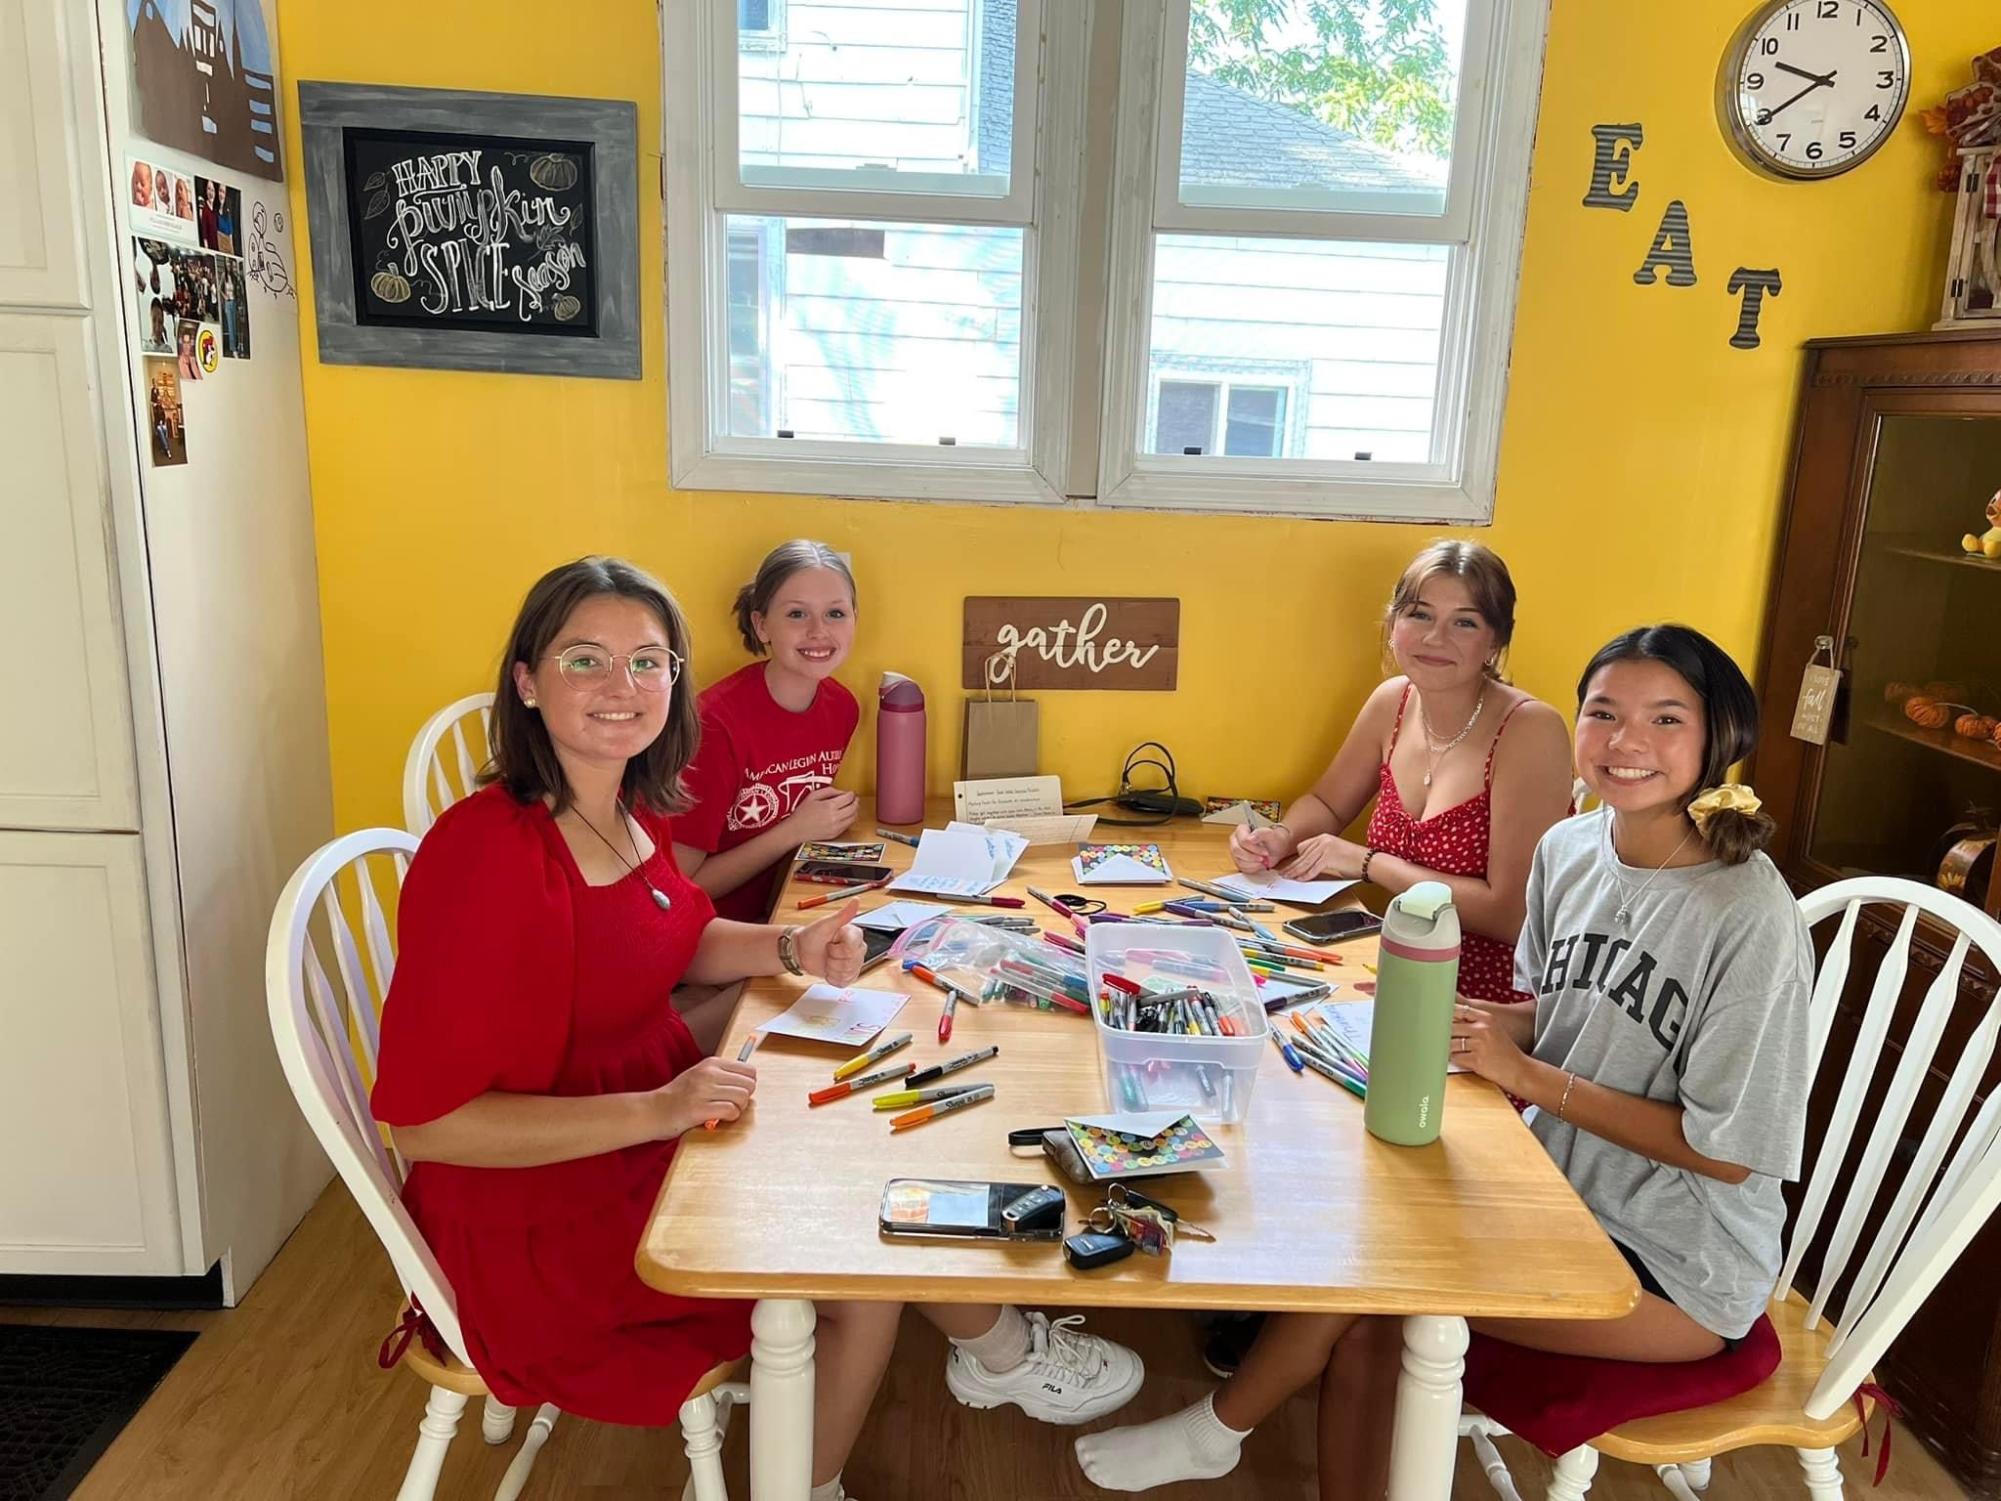 For Septembers service project, Sub Debs write letters to give to residents at a local nursing home. When writing, small groups, also known as color groups, got together as a bonding activity. 